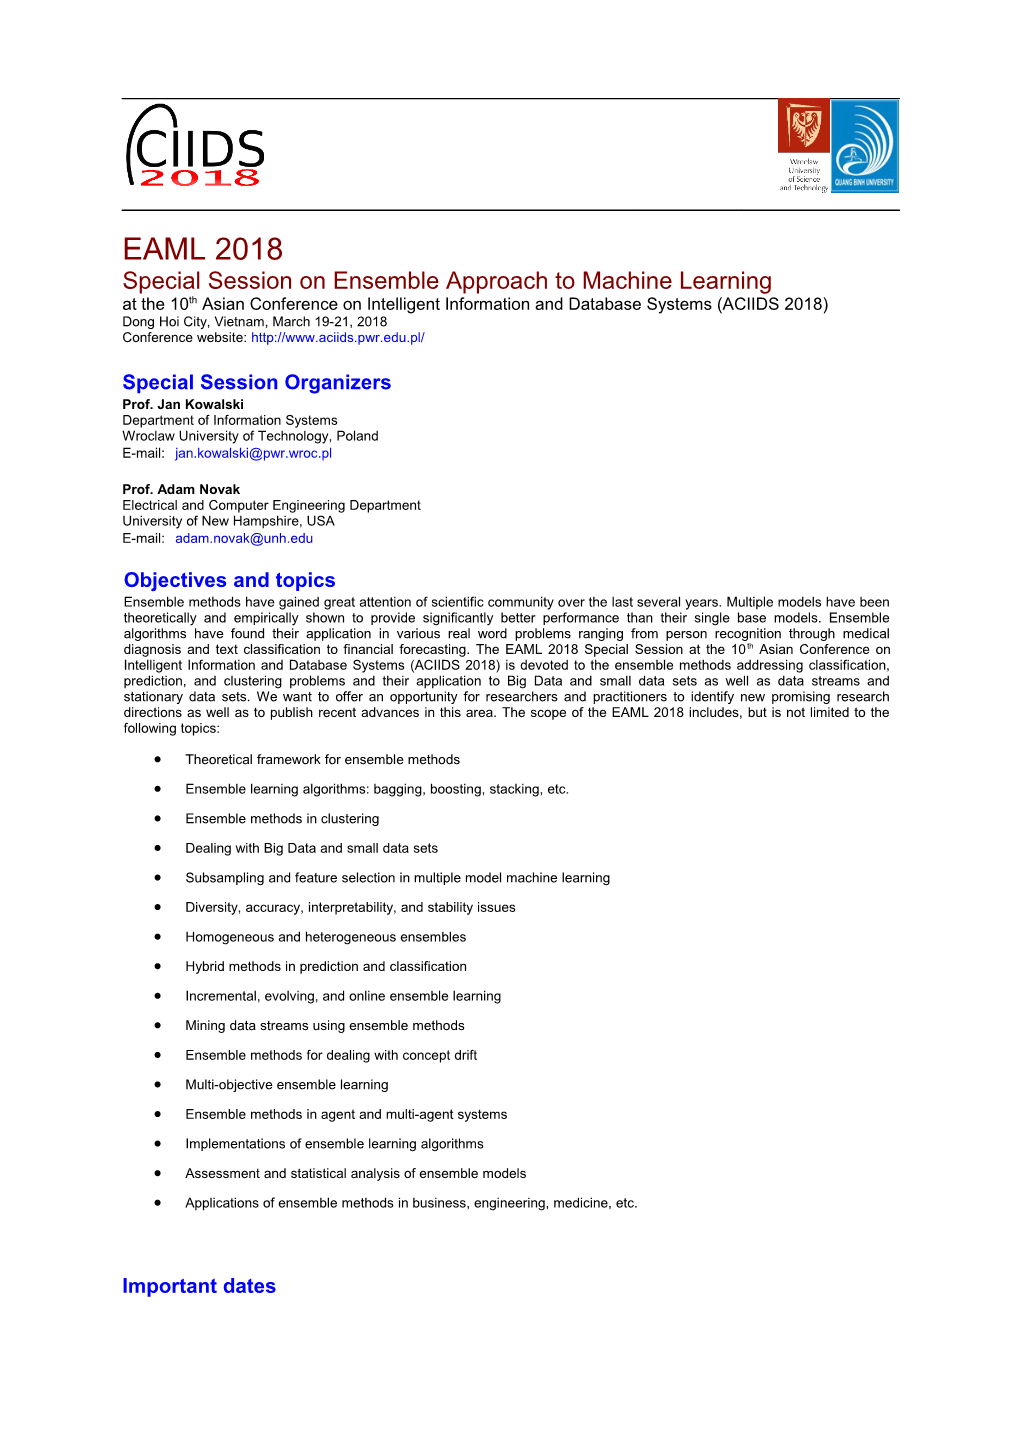 Special Session on Ensemble Approach to Machine Learning